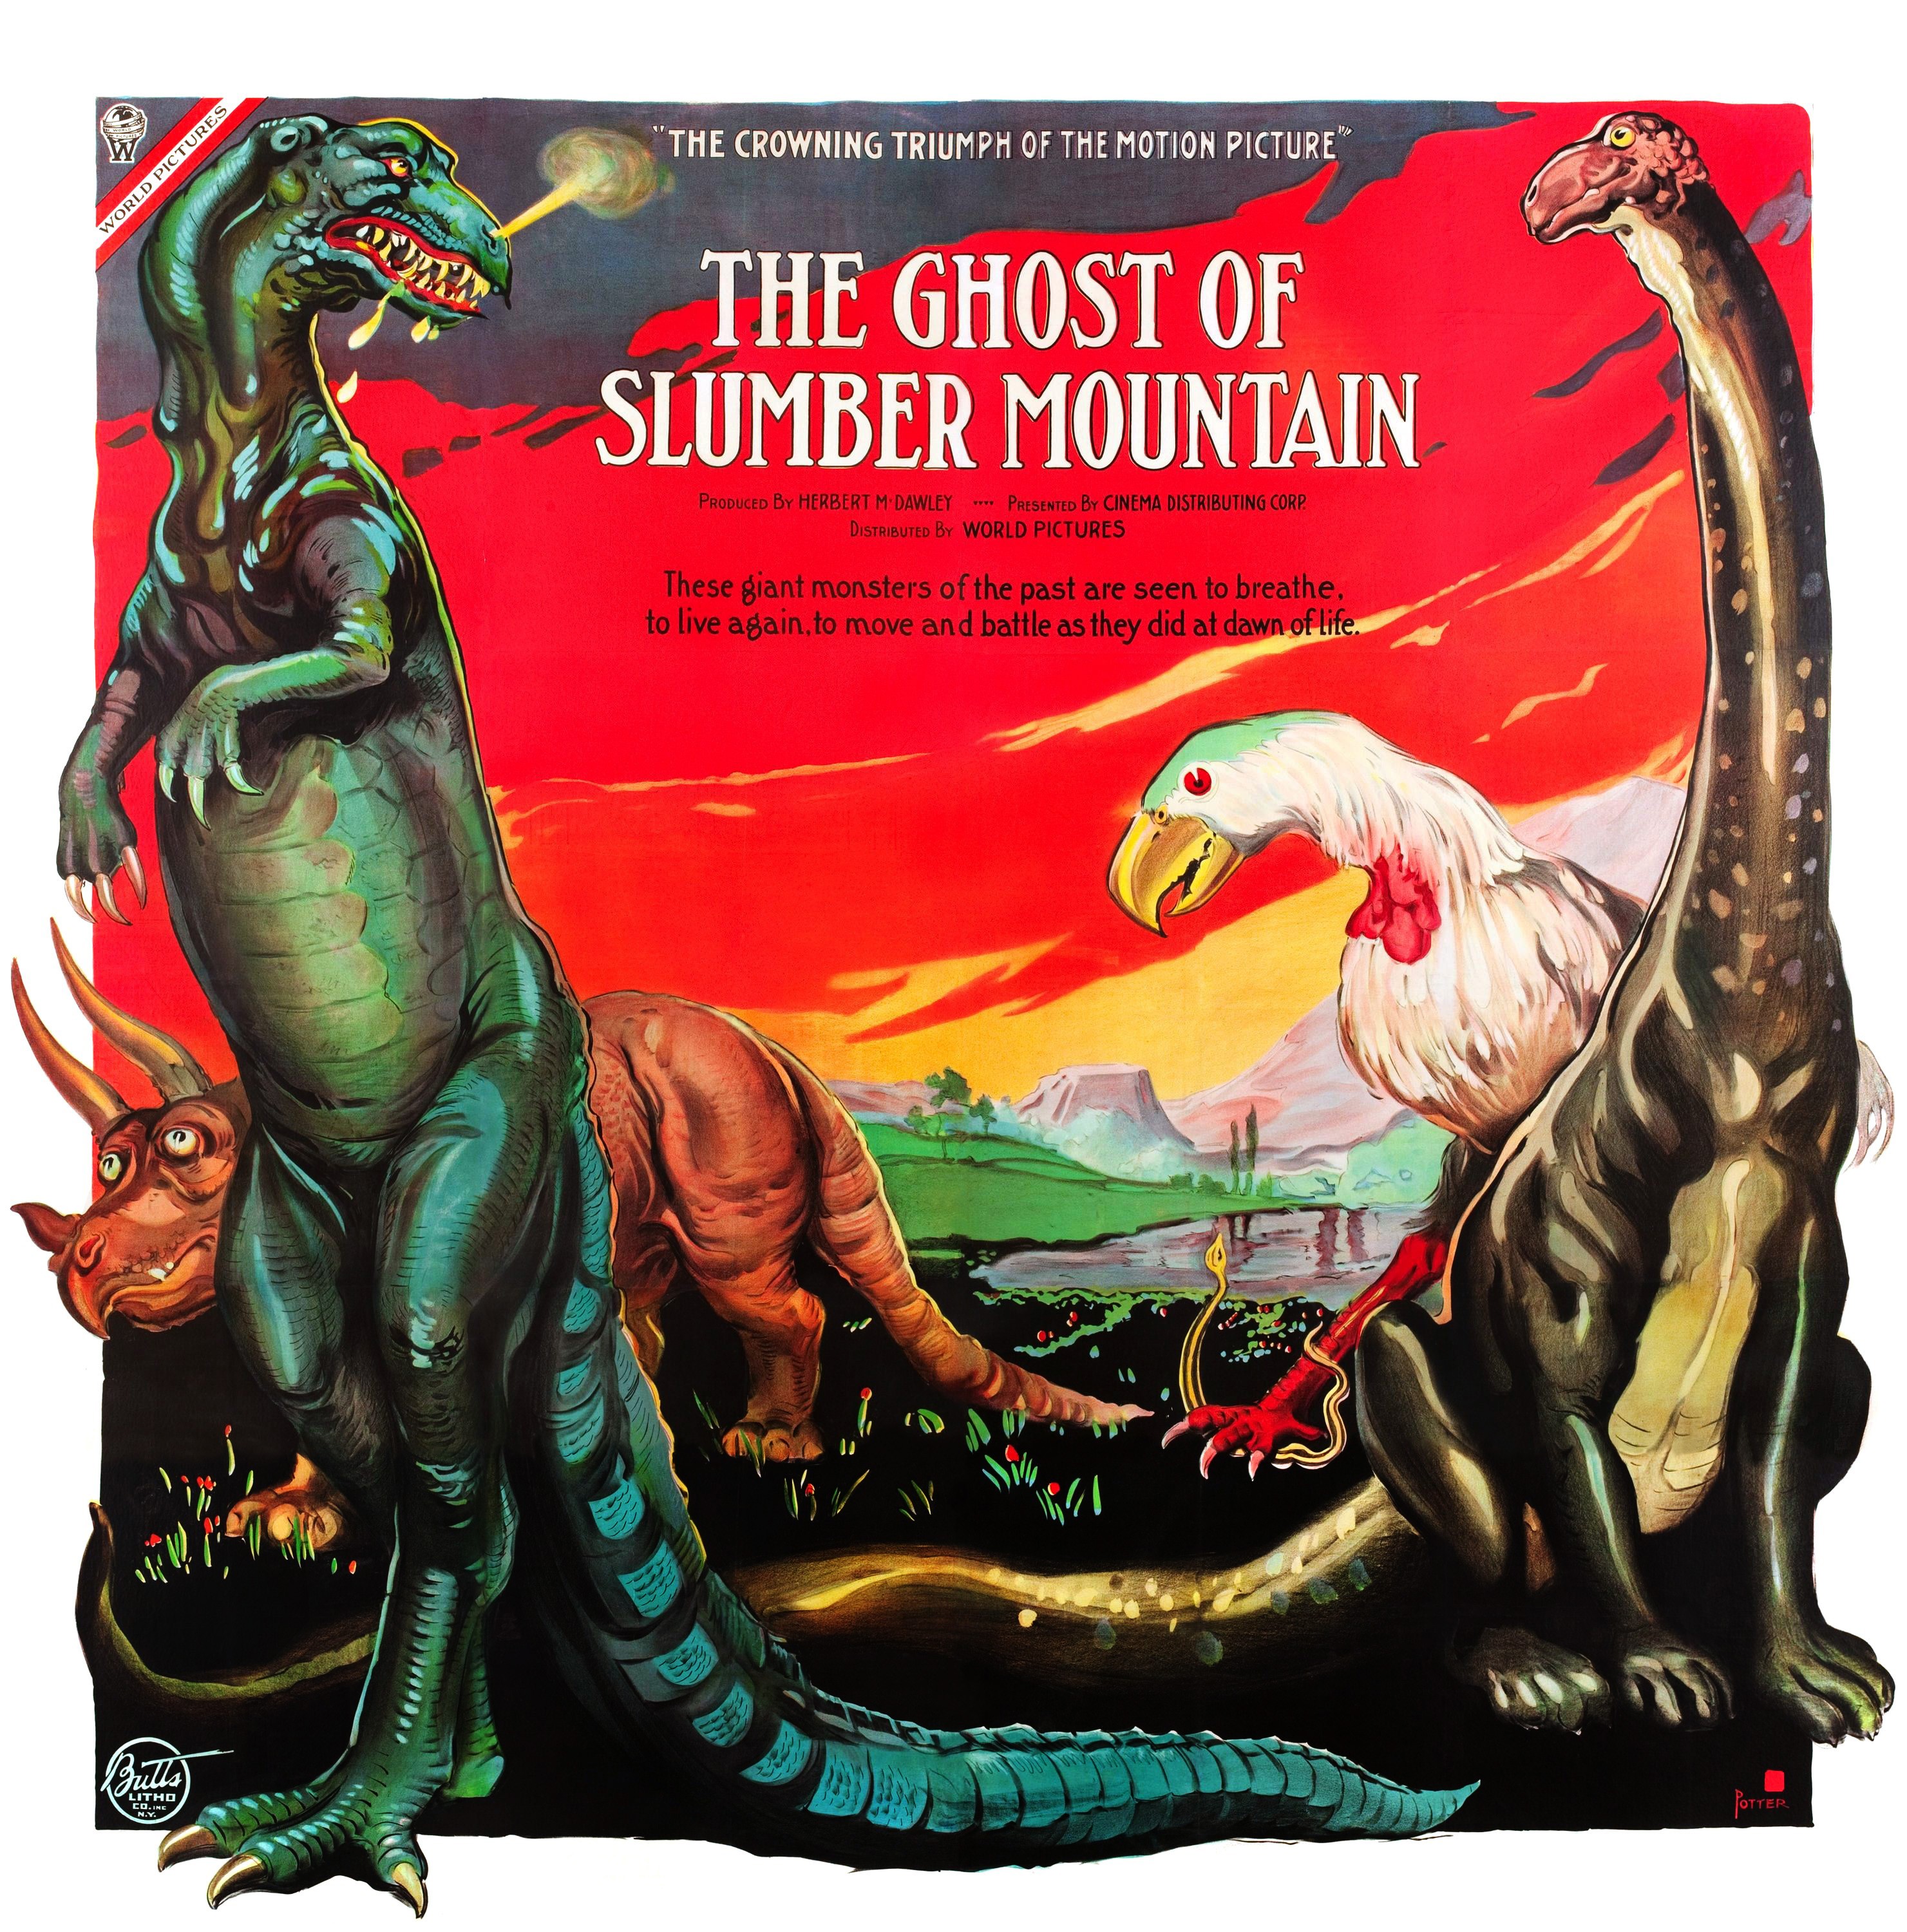 Mega Sized Movie Poster Image for The Ghost of Slumber Mountain